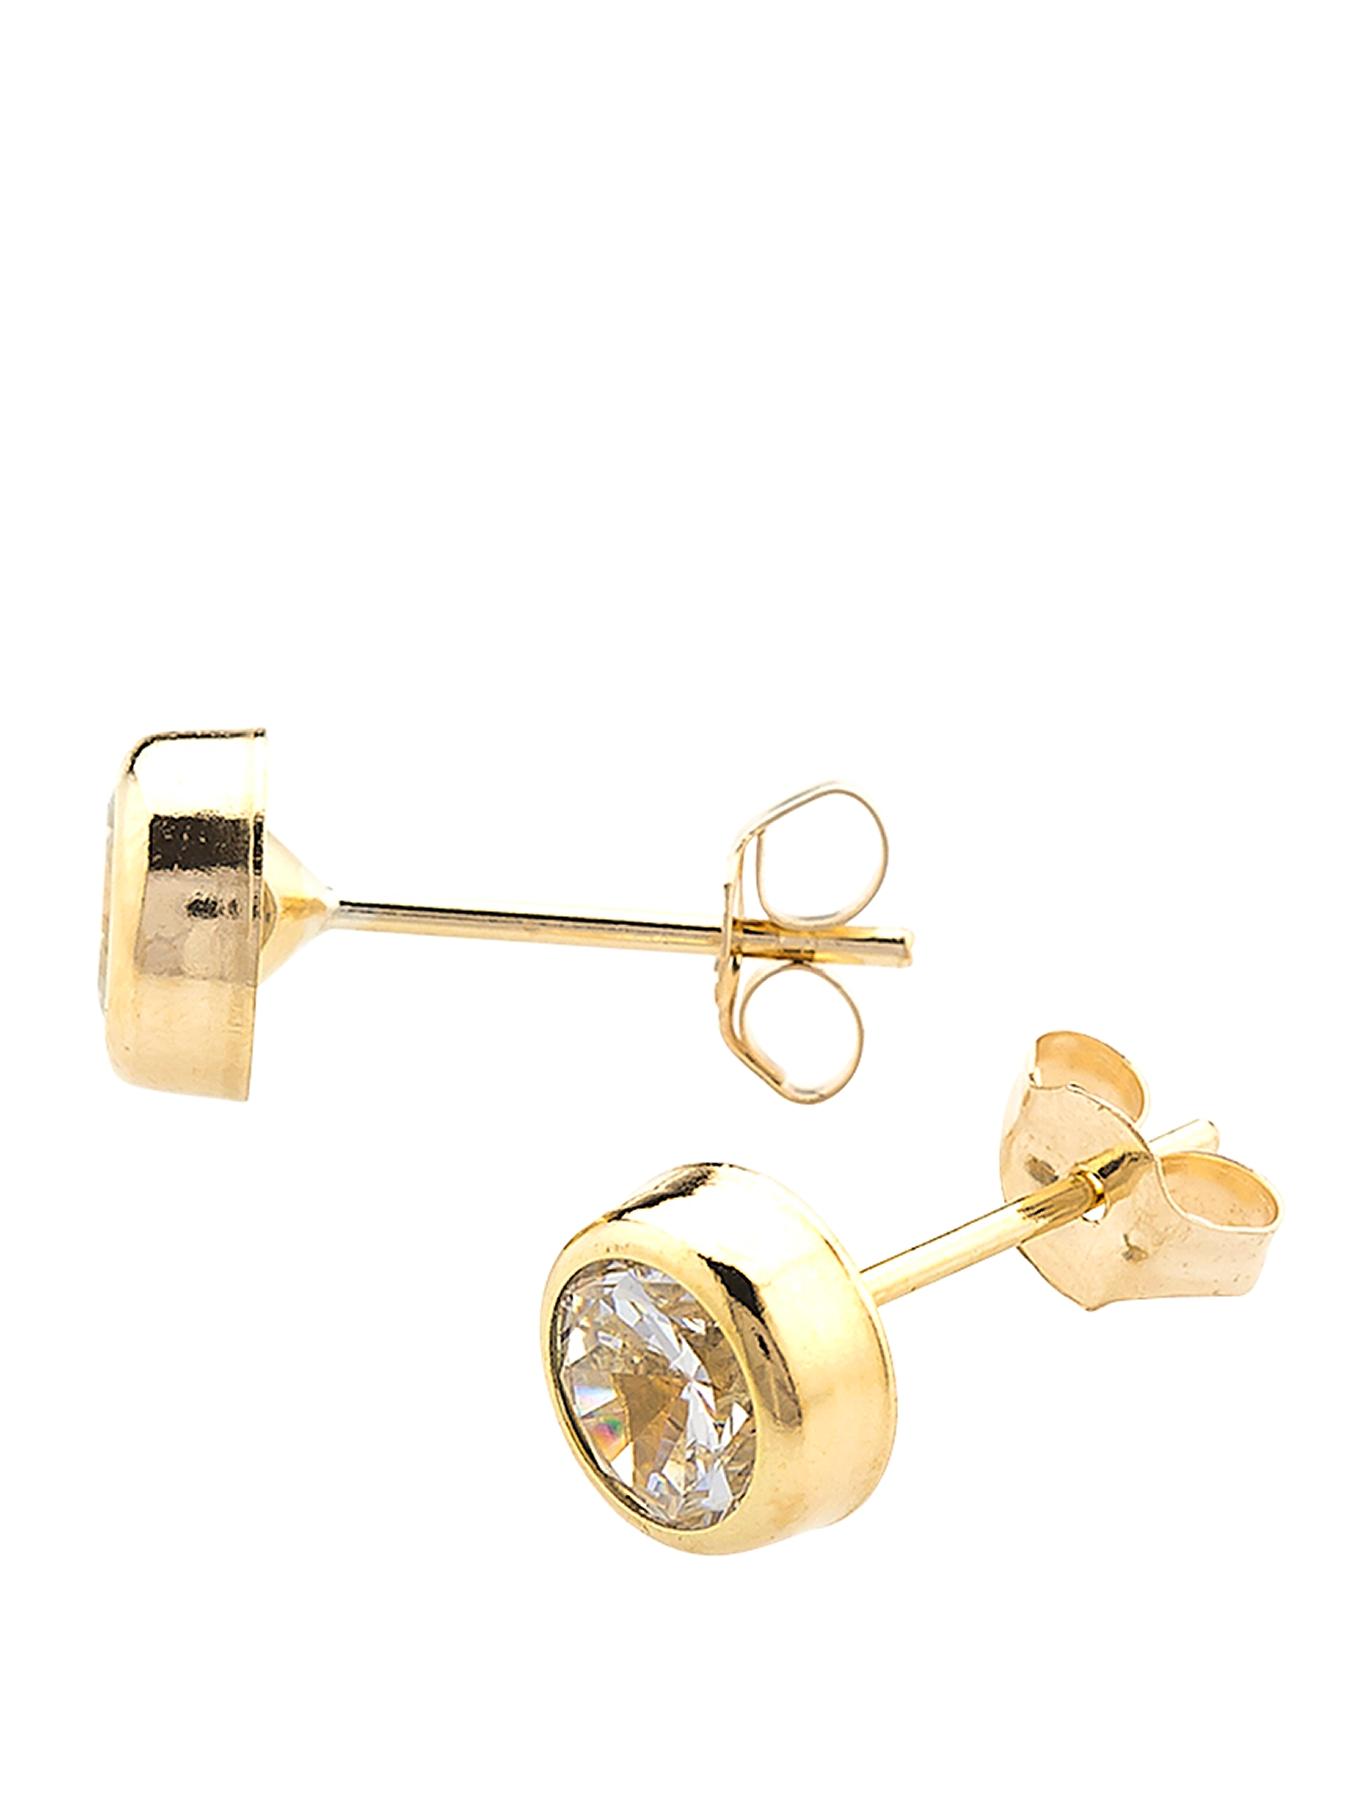 Jewellery & watches 9 Carat Yellow Gold 5 mm Round Cubic Zirconia Rubover Stud Earrings